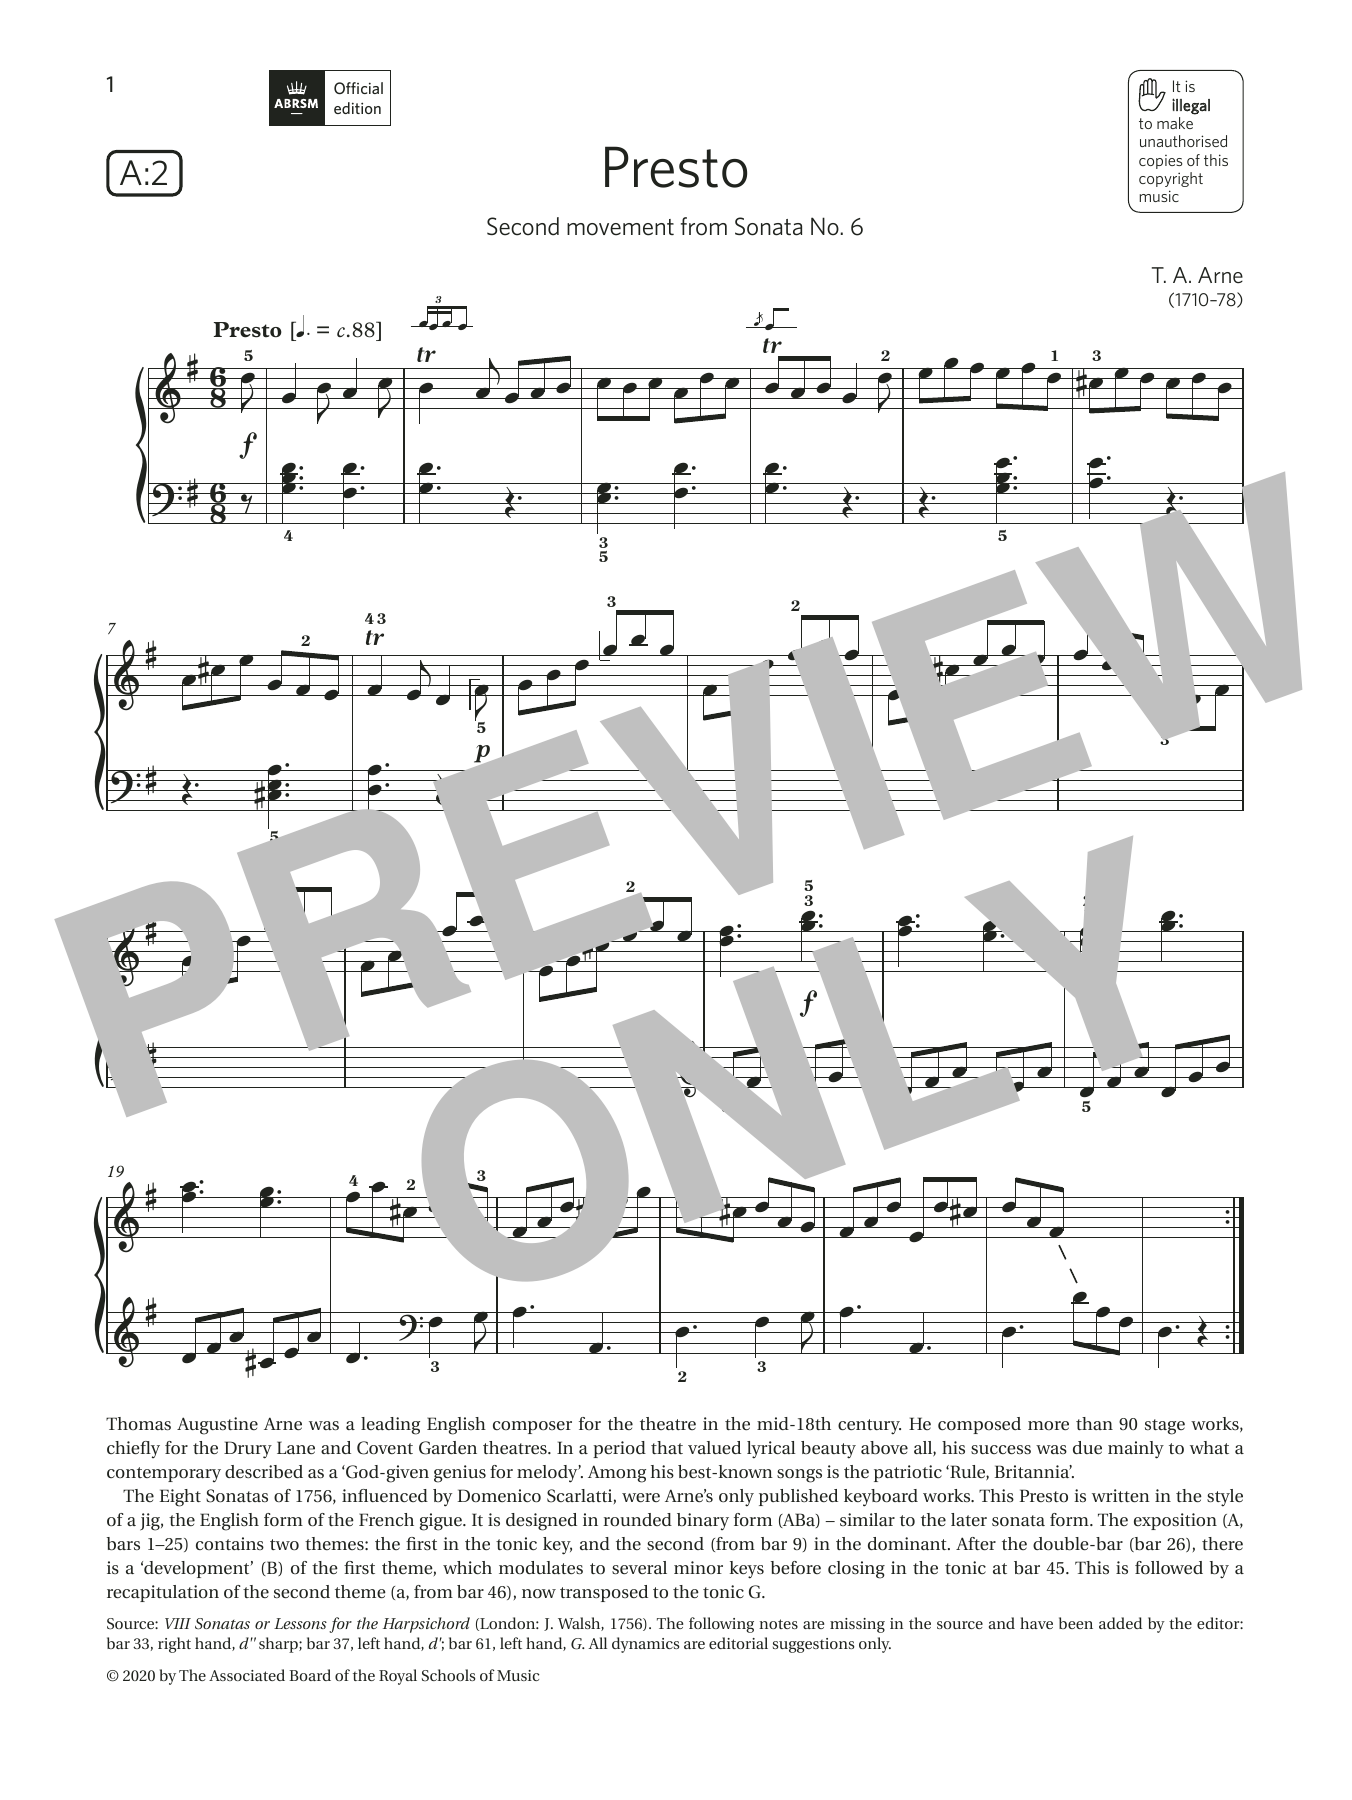 Download T. A. Arne Presto (Grade 5, list A2, from the ABRS Sheet Music